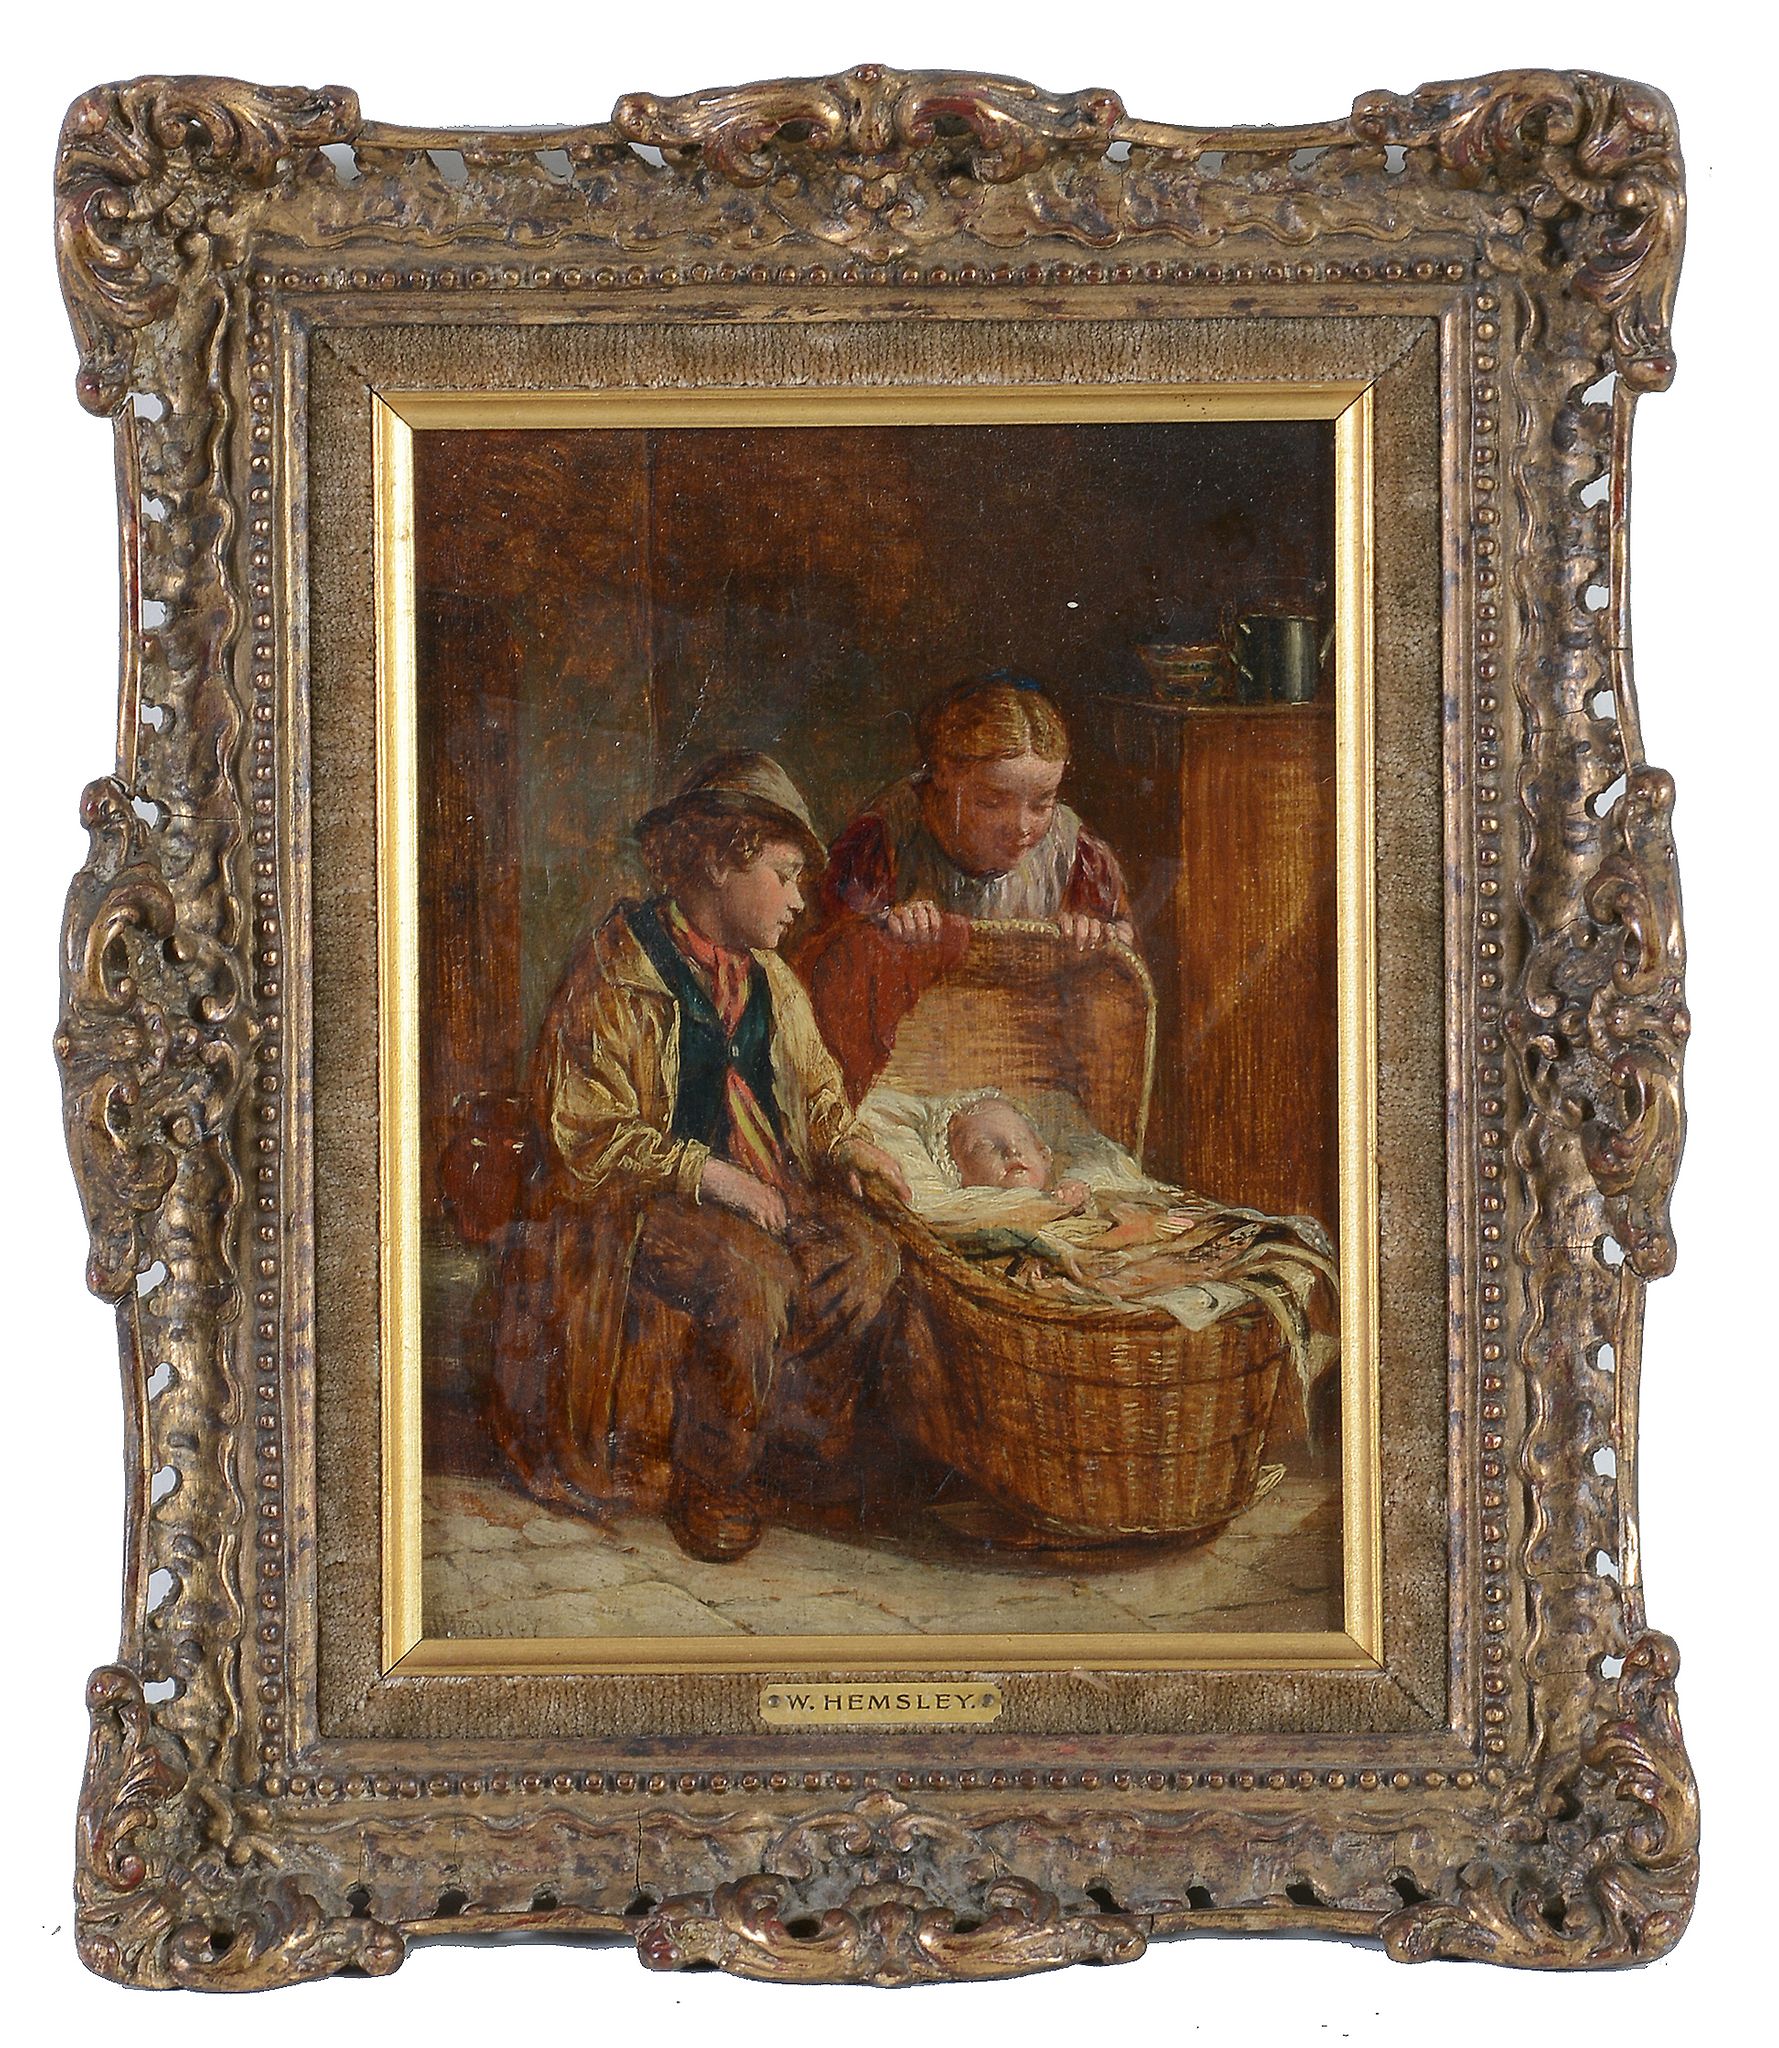 William Hemsley (1819-1893) - Two Children with a baby asleep in a crib Oil on board Signed in black - Image 2 of 2